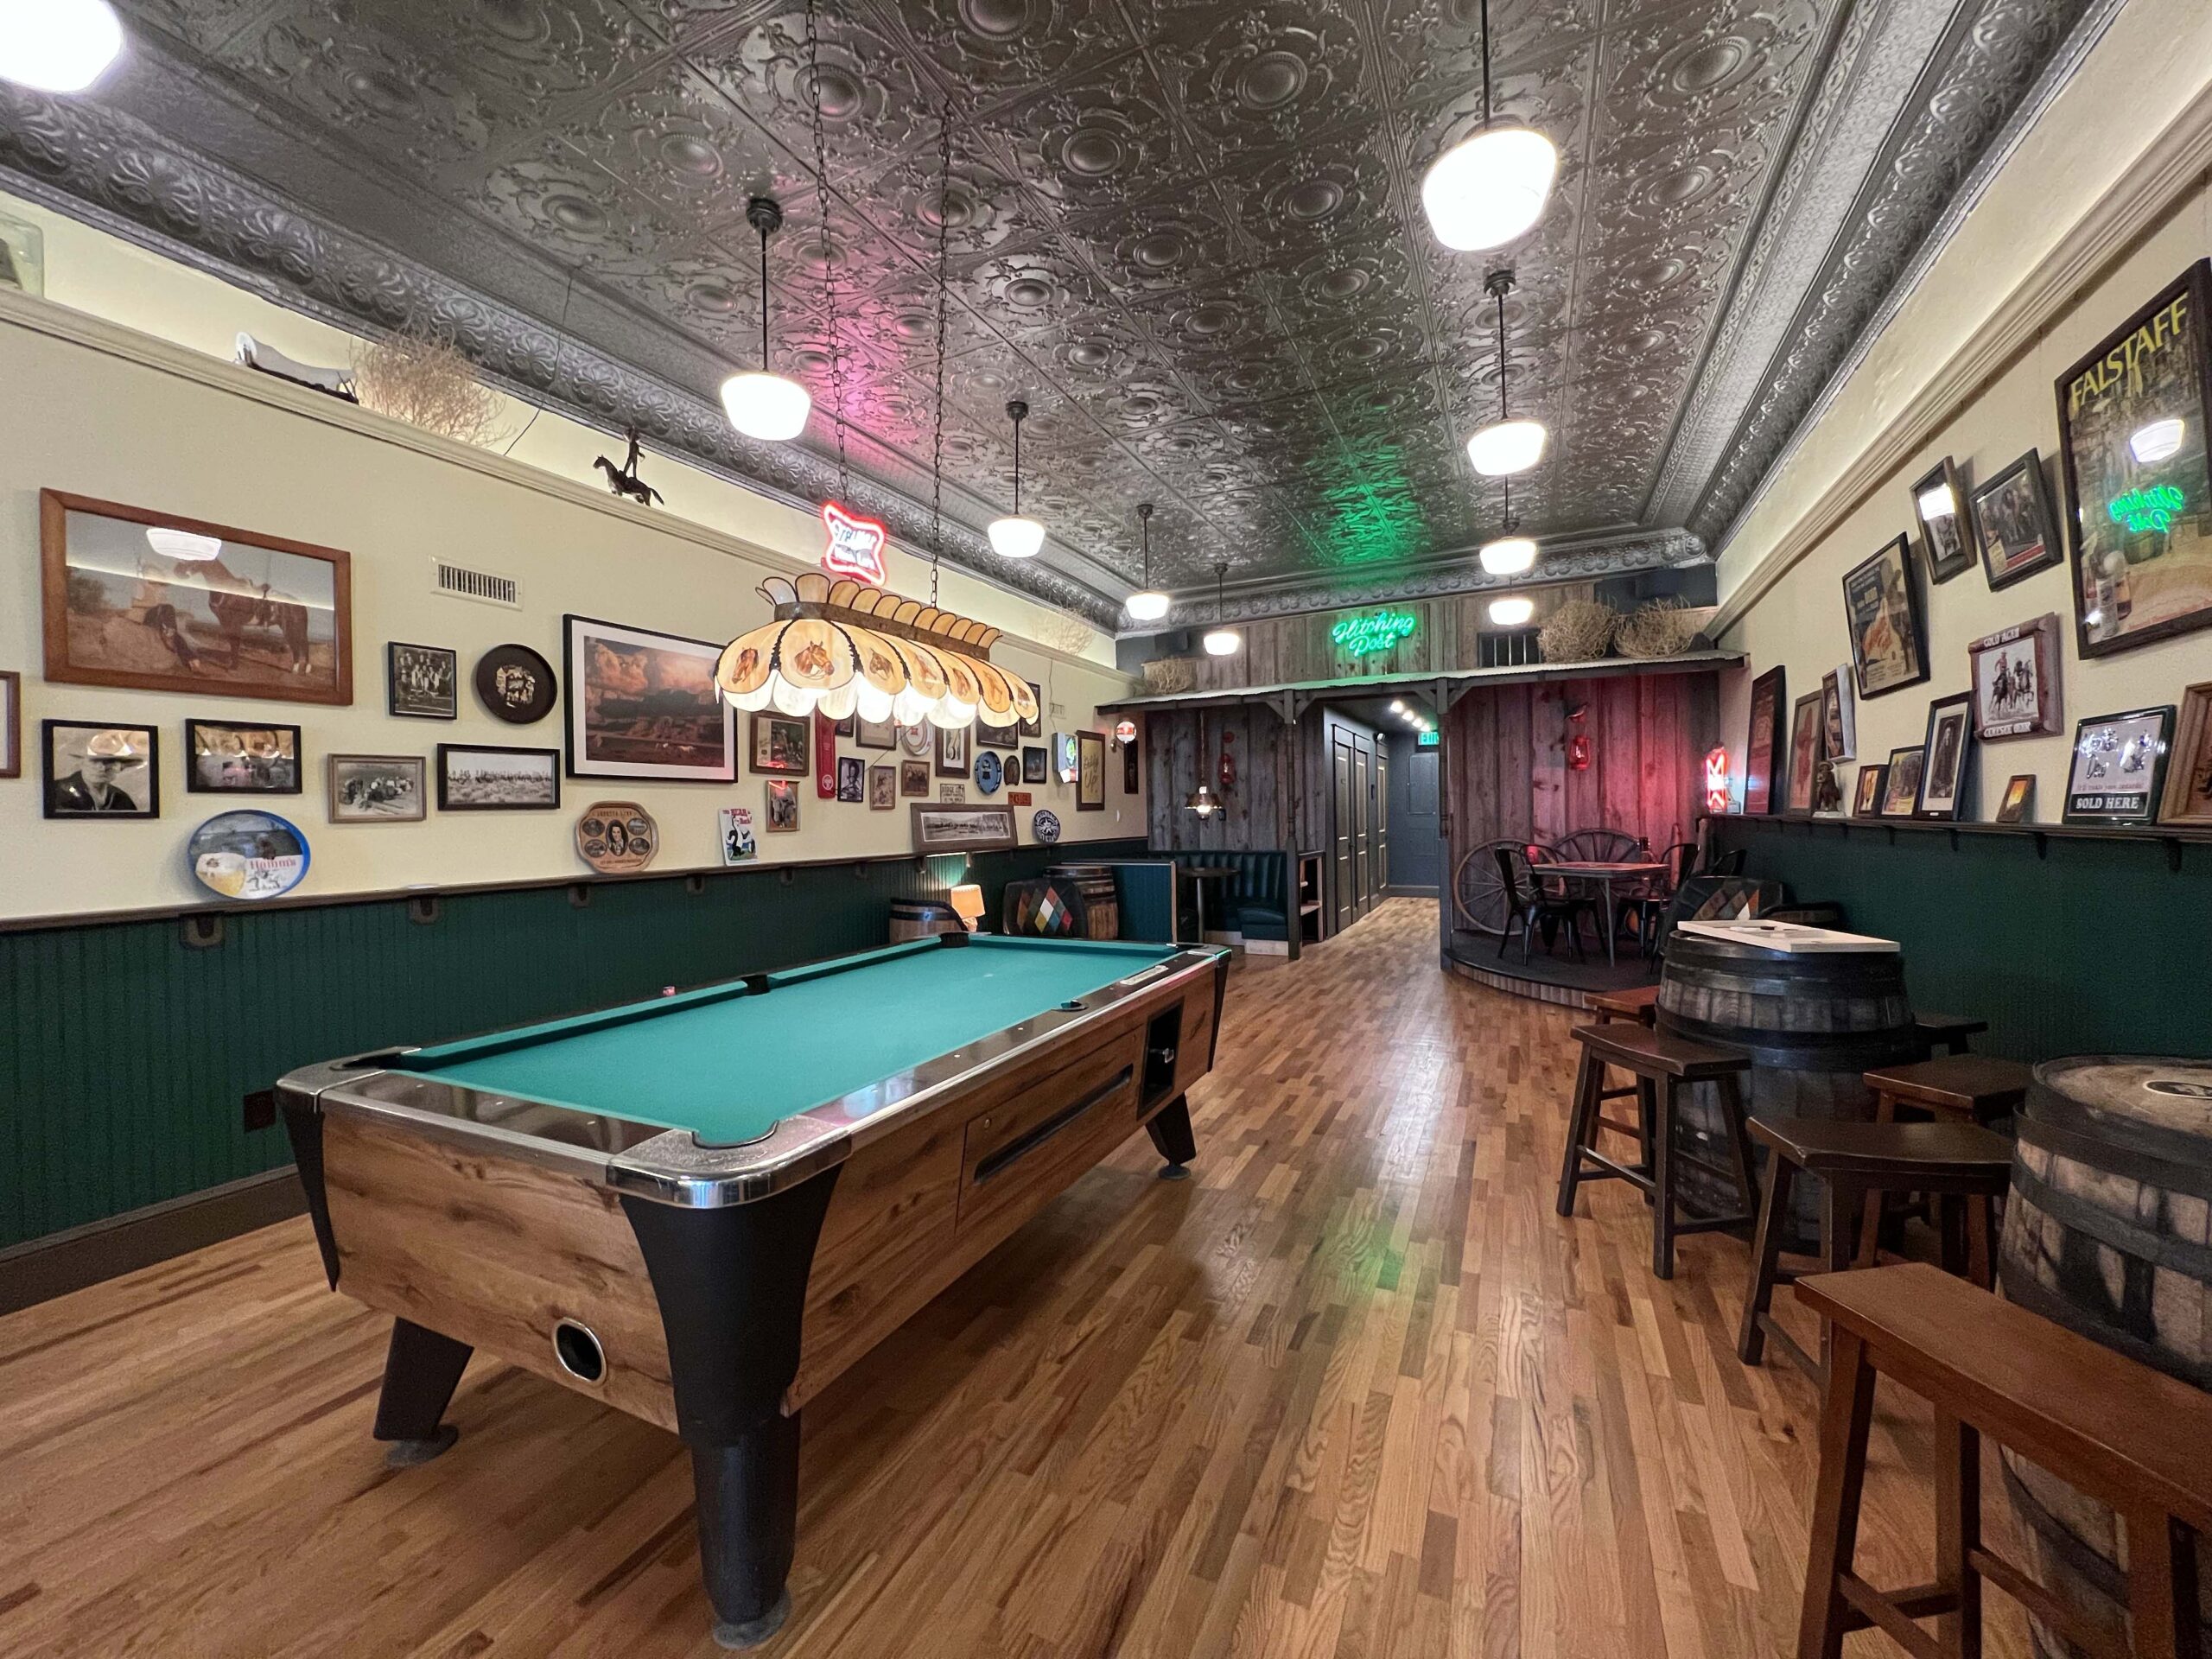 Pool table inside The Hitching Post, Humboldt